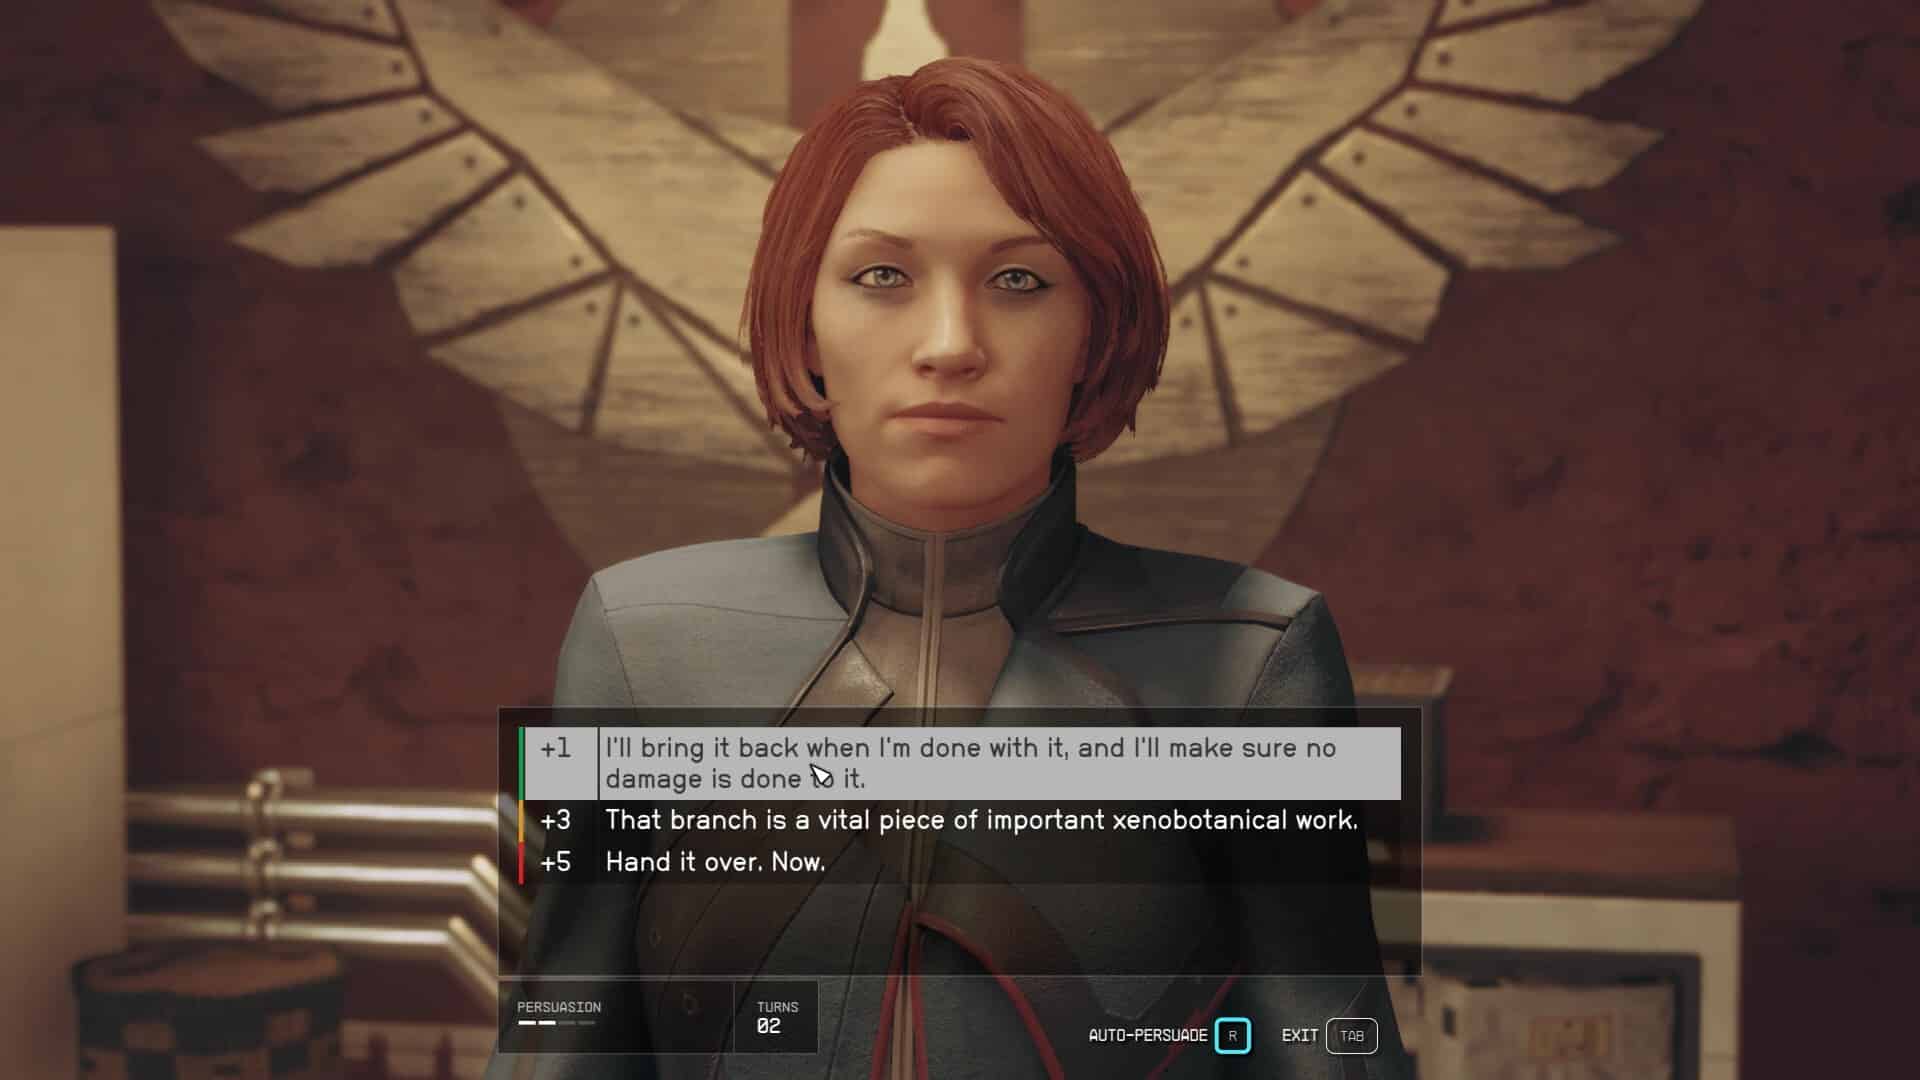 A woman with red hair is standing in front of a computer screen, trying to persuade Leah Casler to hand over the branch for the Starfield Late Bloomer quest.